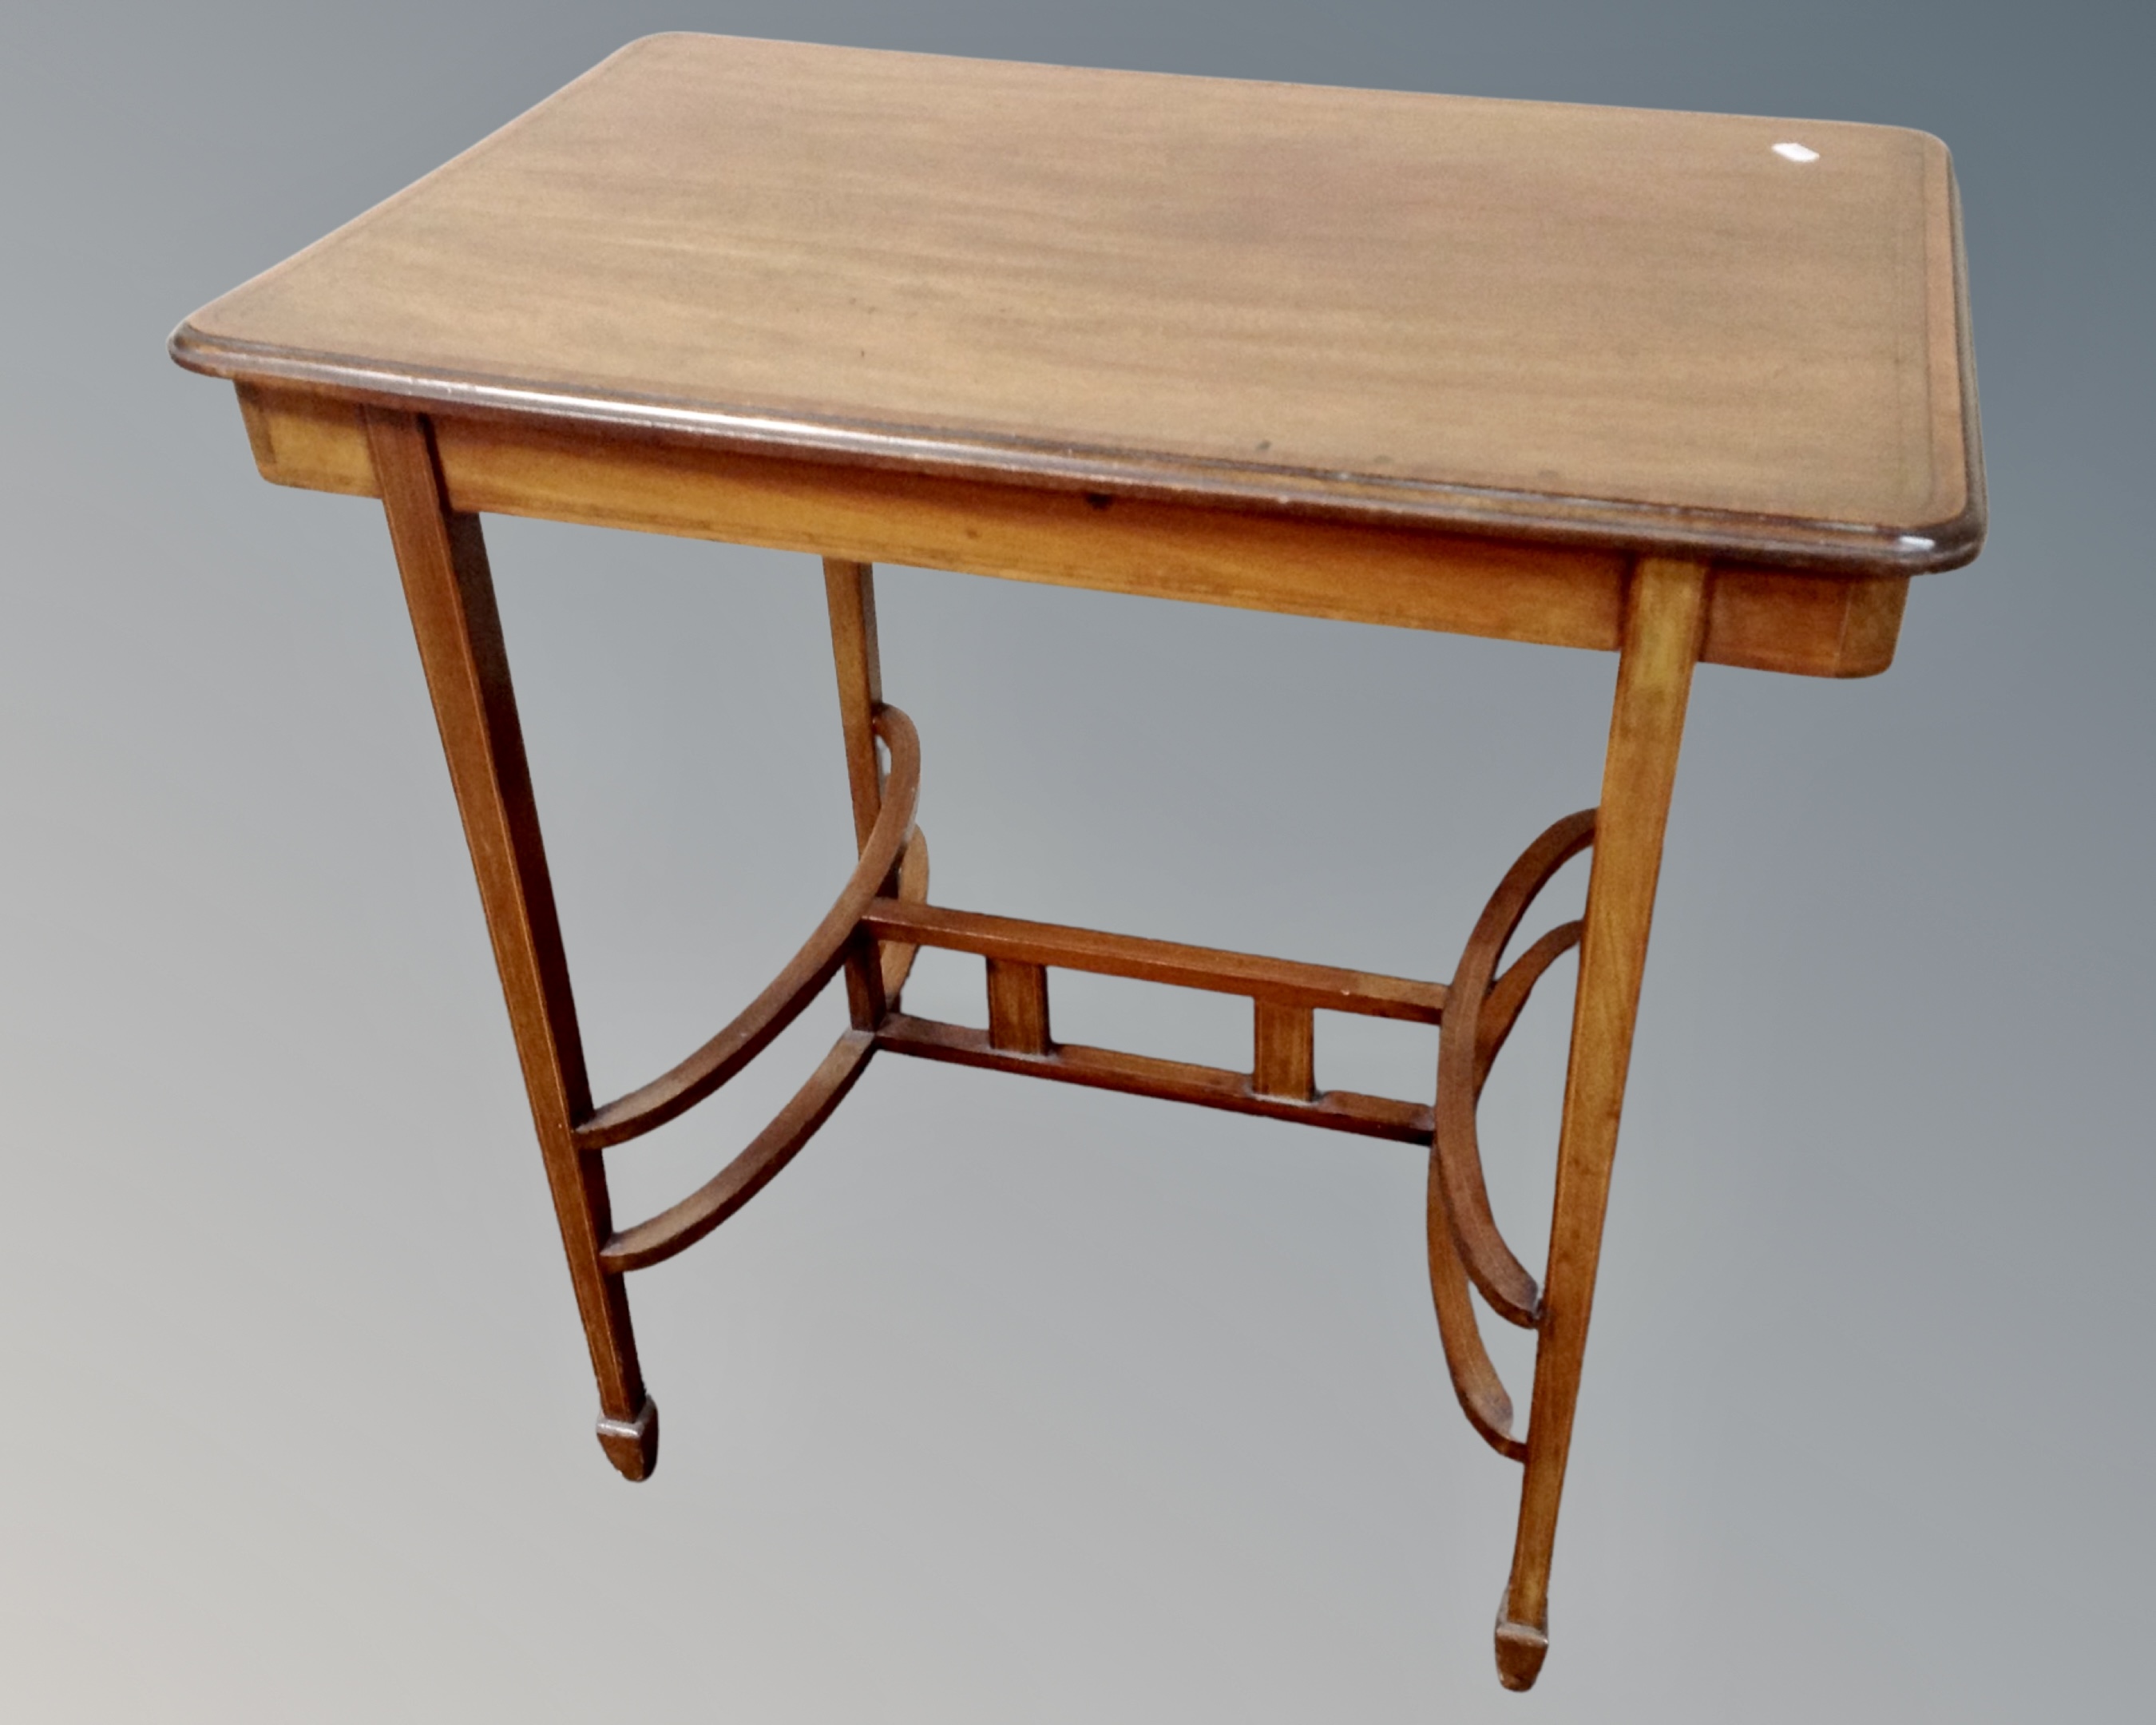 A 19th century mahogany satinwood inlaid occasional table with understretcher